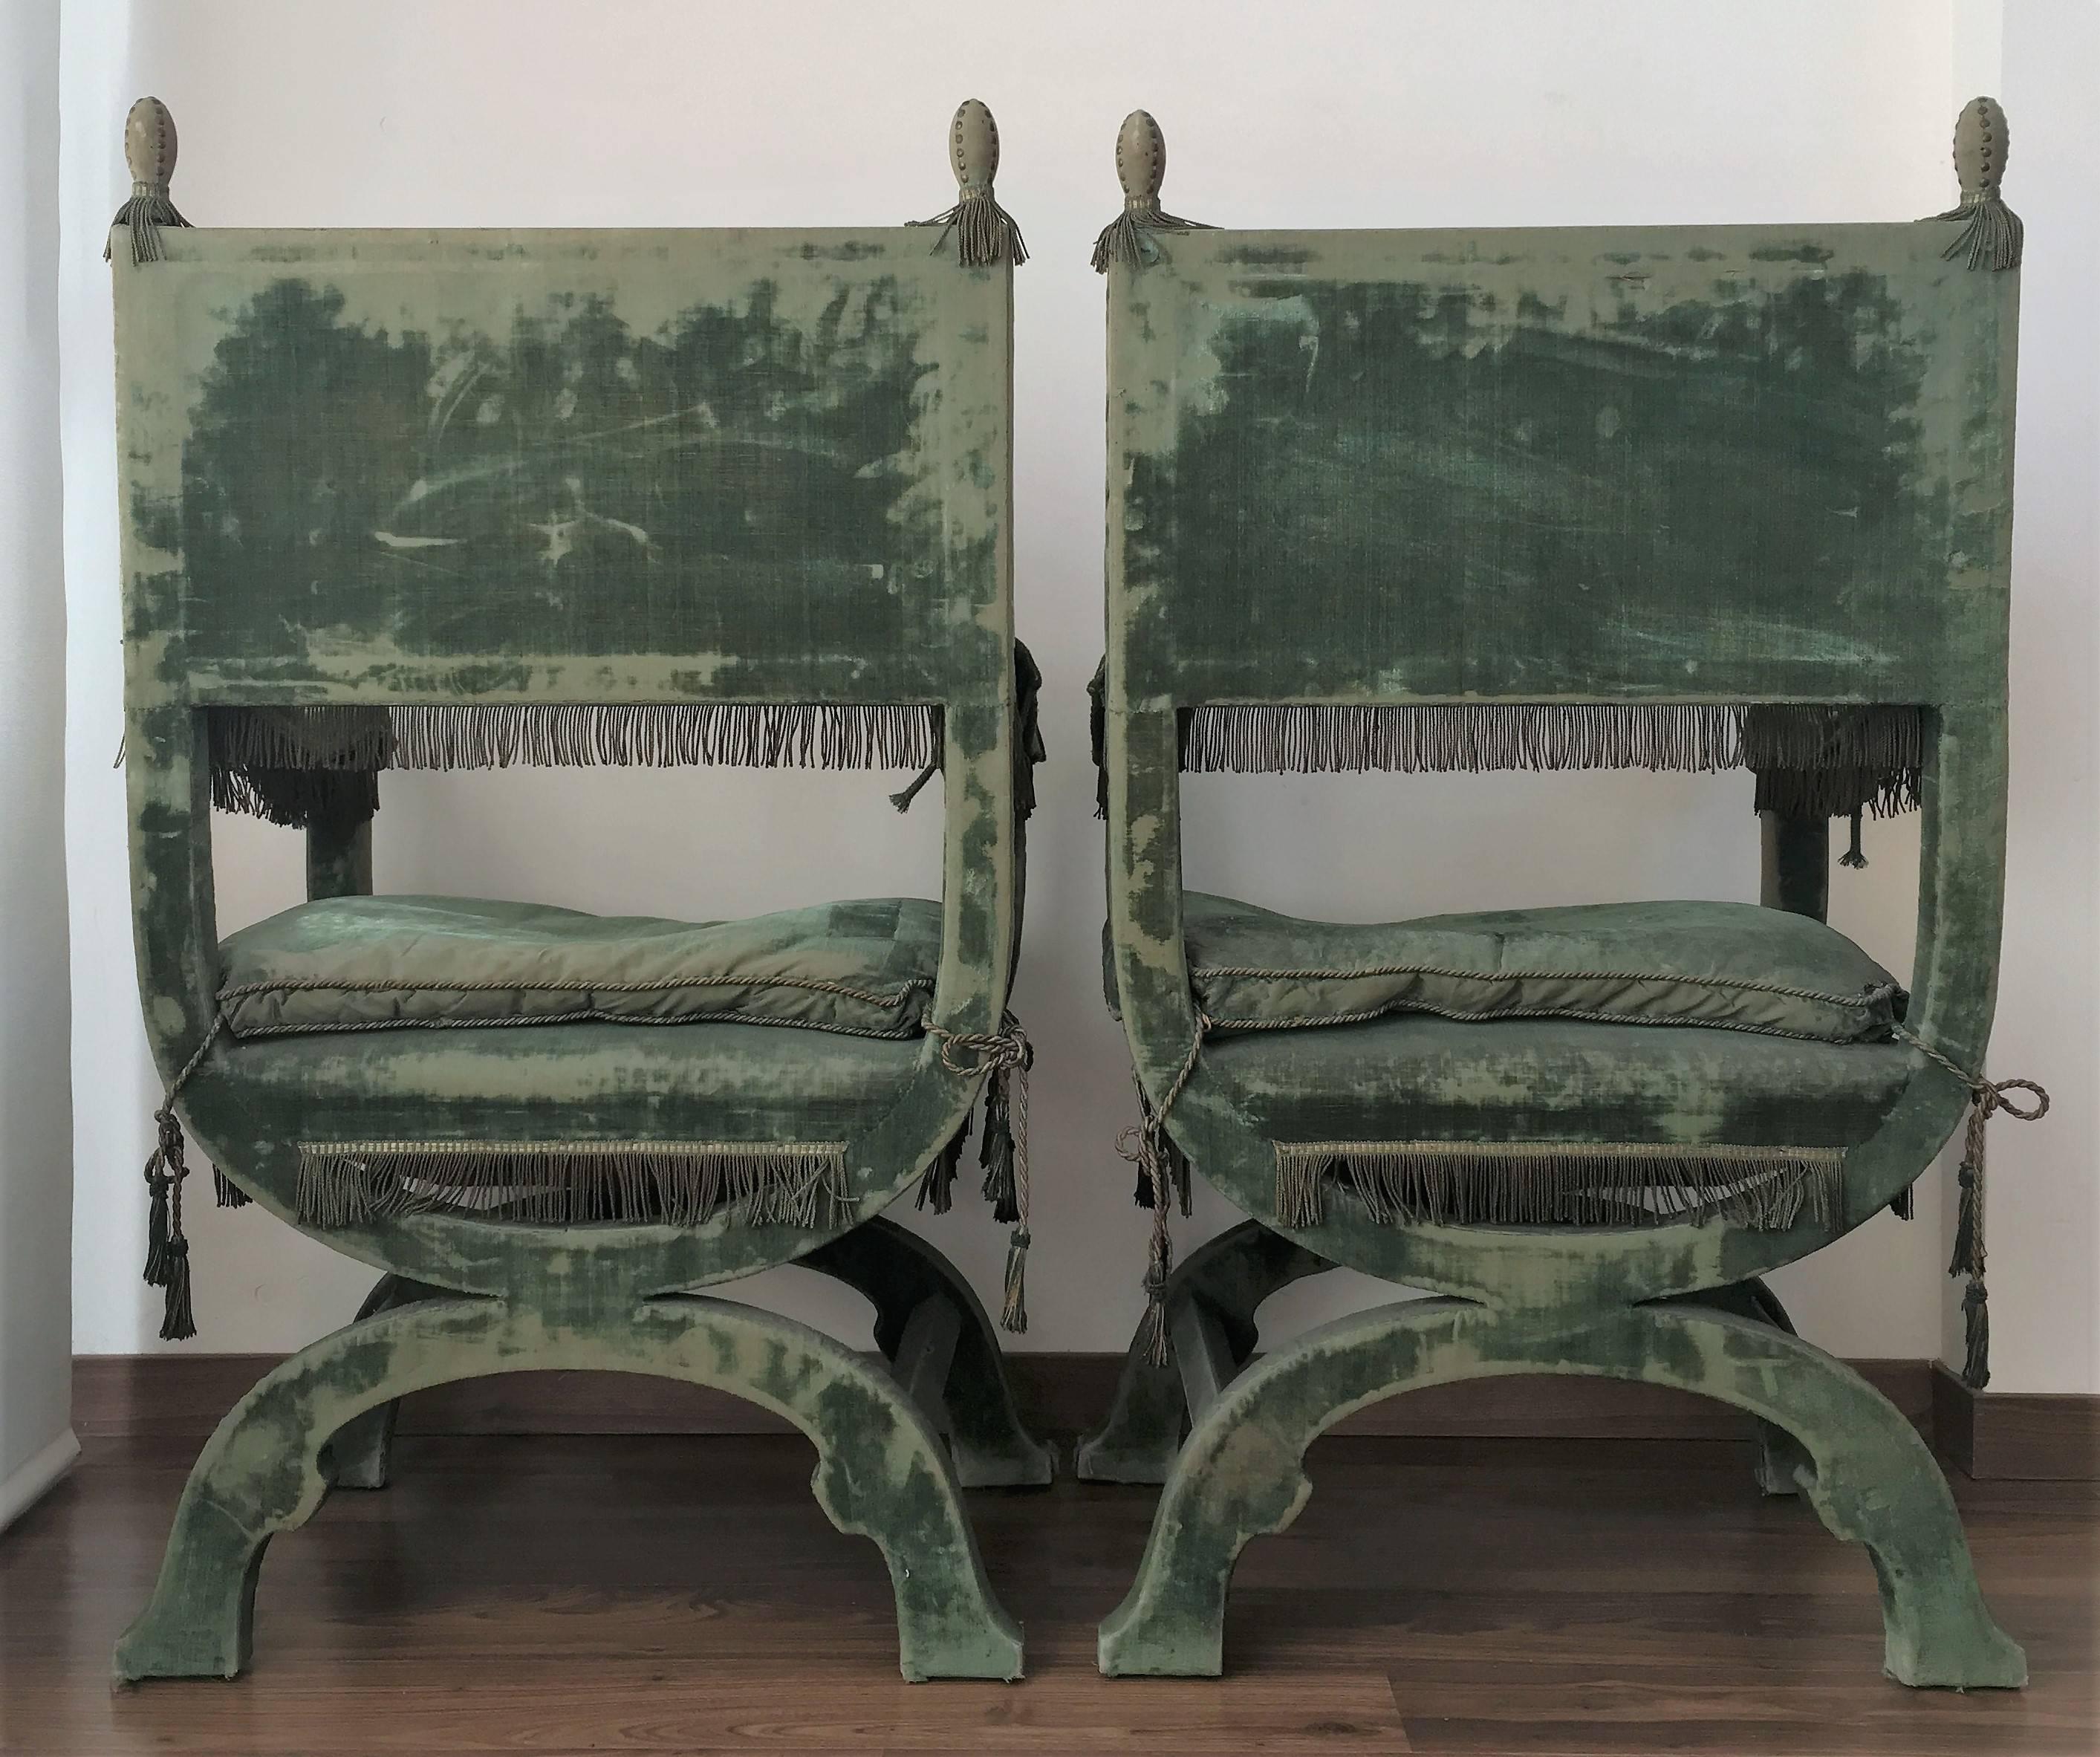 A charming and rare pair of 19th century walnut curule-form armchair, each with back, arms and seat cushion, on curved legs.
Upholstered in original worn green silk velvet with heraldic shield in each back.